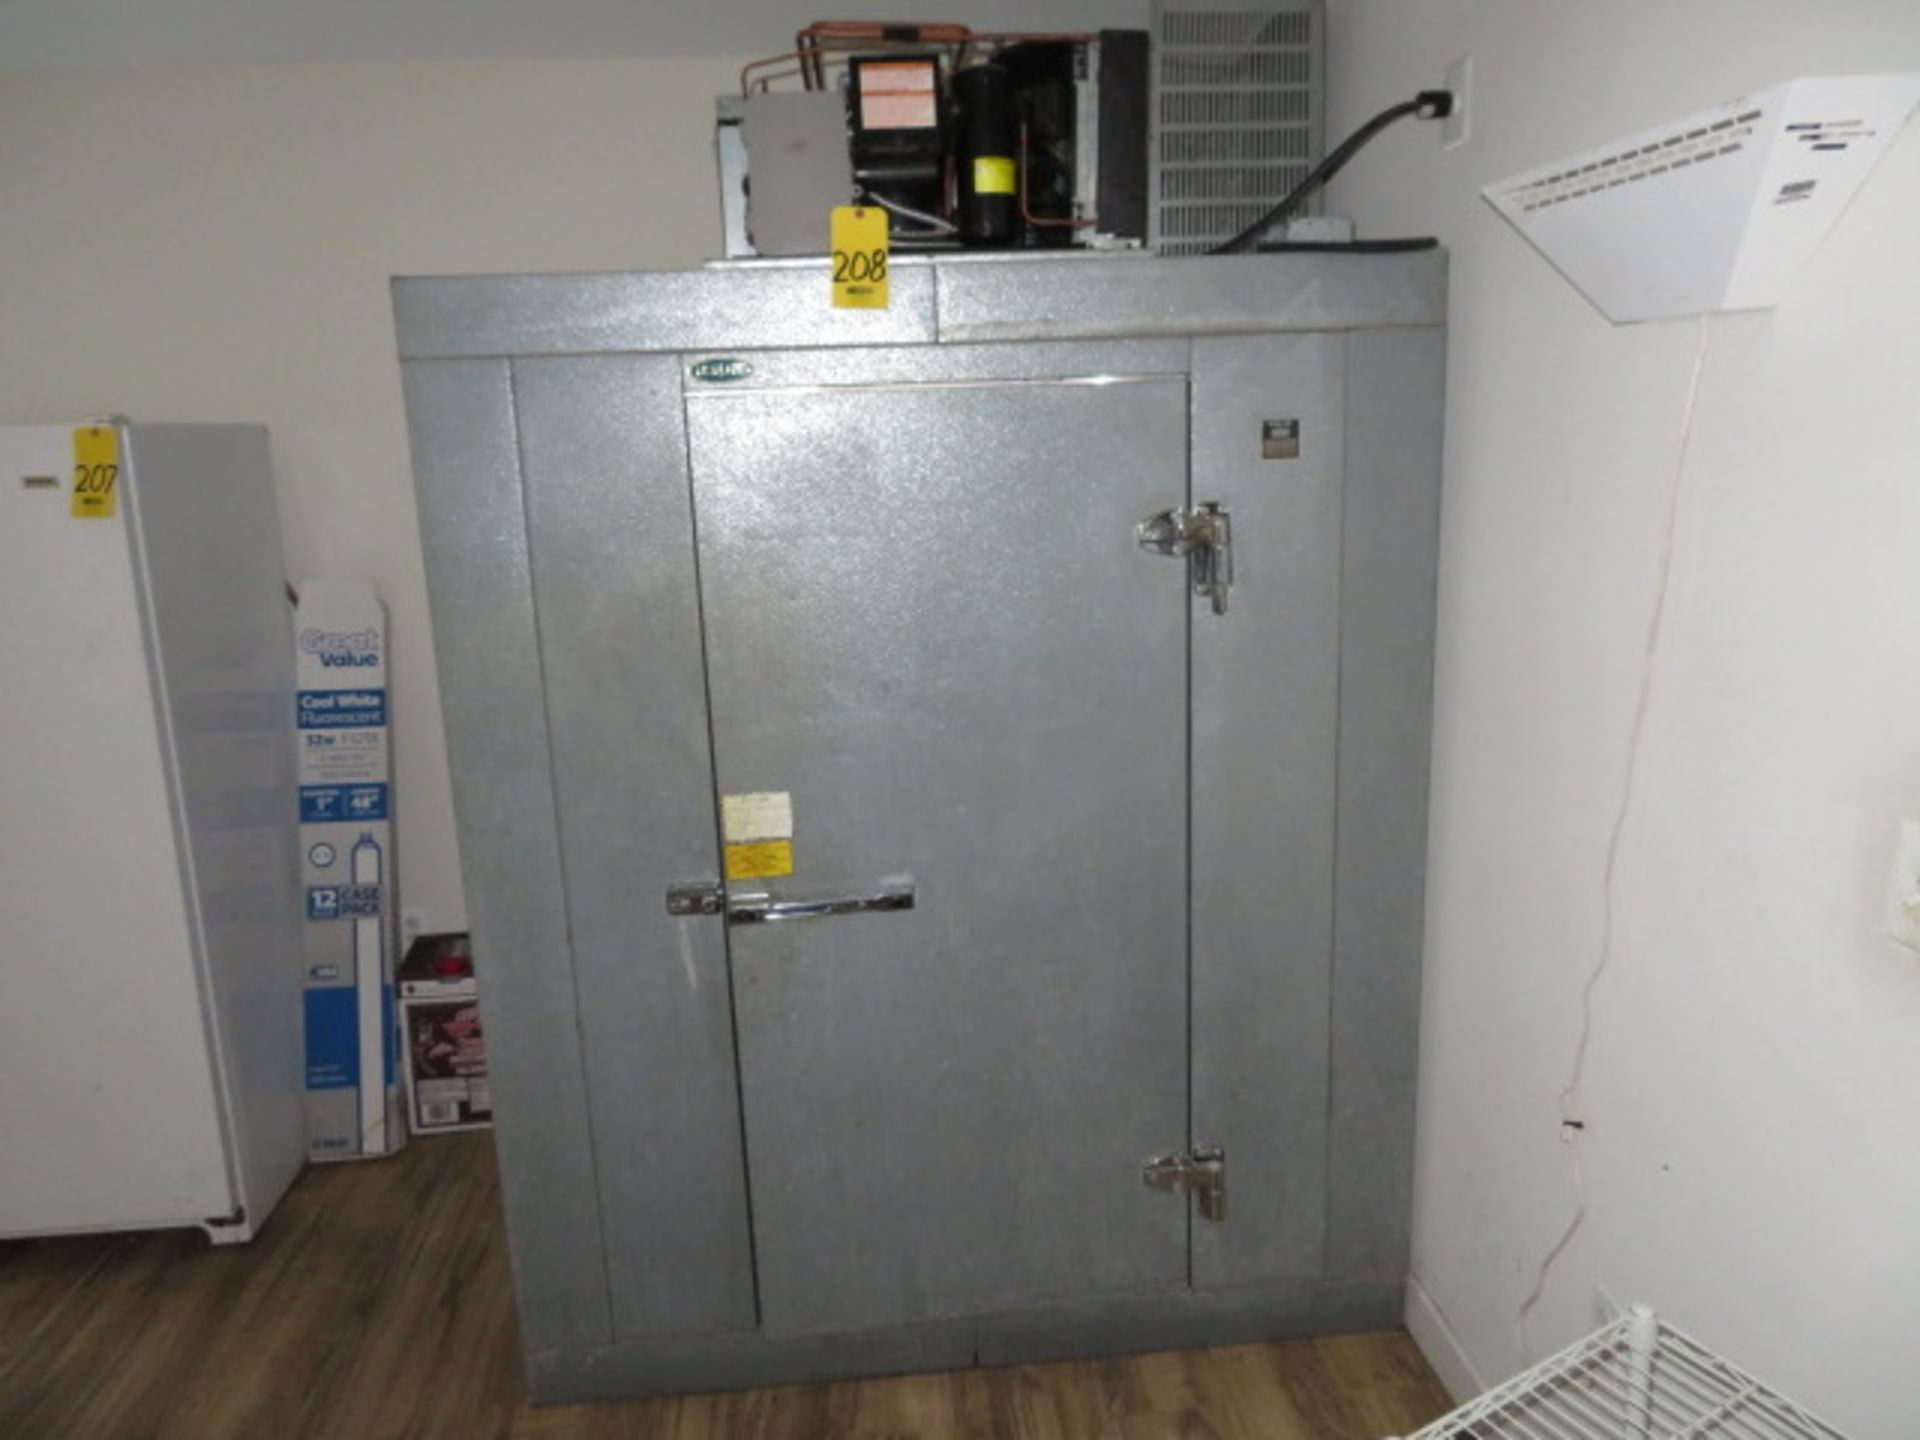 NORLAKE WALK-IN COOLER, 5'X5' W/SHELVING, MDL. KLB45-CR-SUB (Located - Mays Landing, NJ) - Image 8 of 9